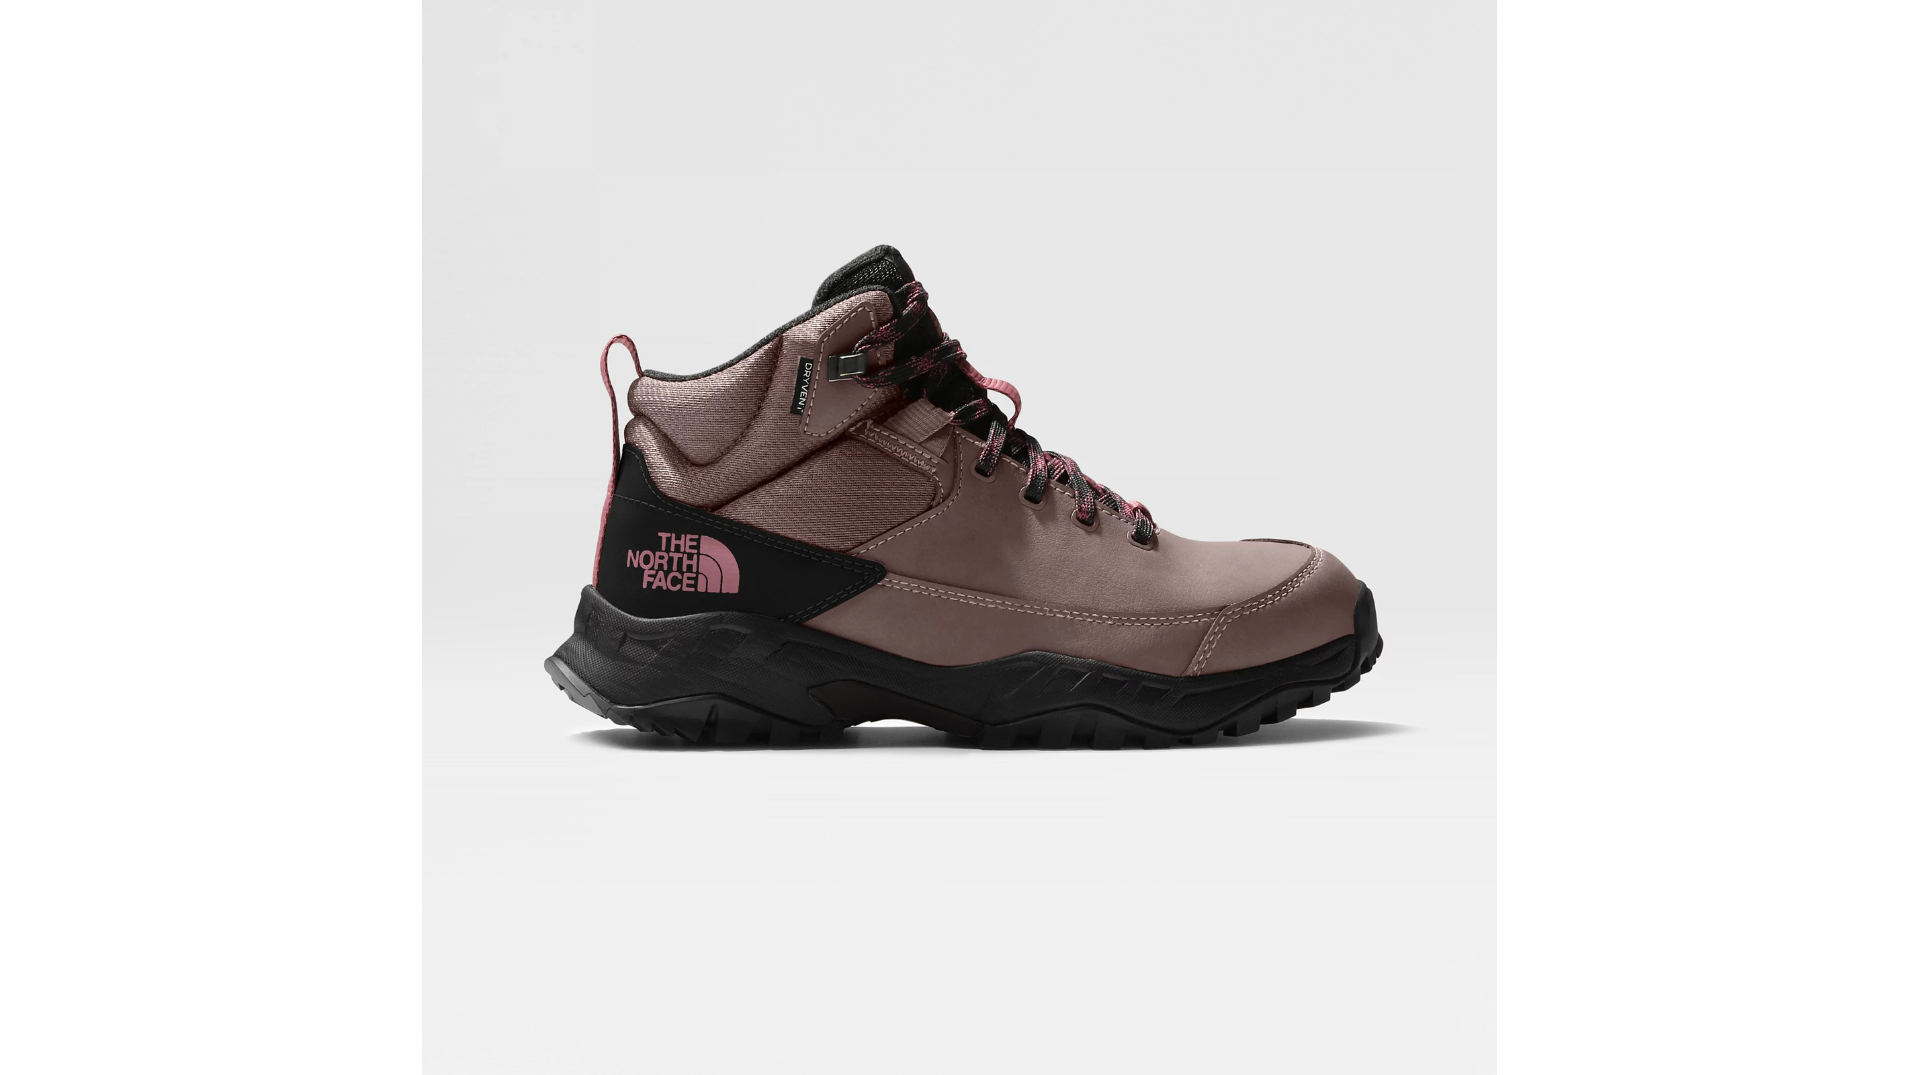 The North Face Womens Storm Strike III Waterproof Boots